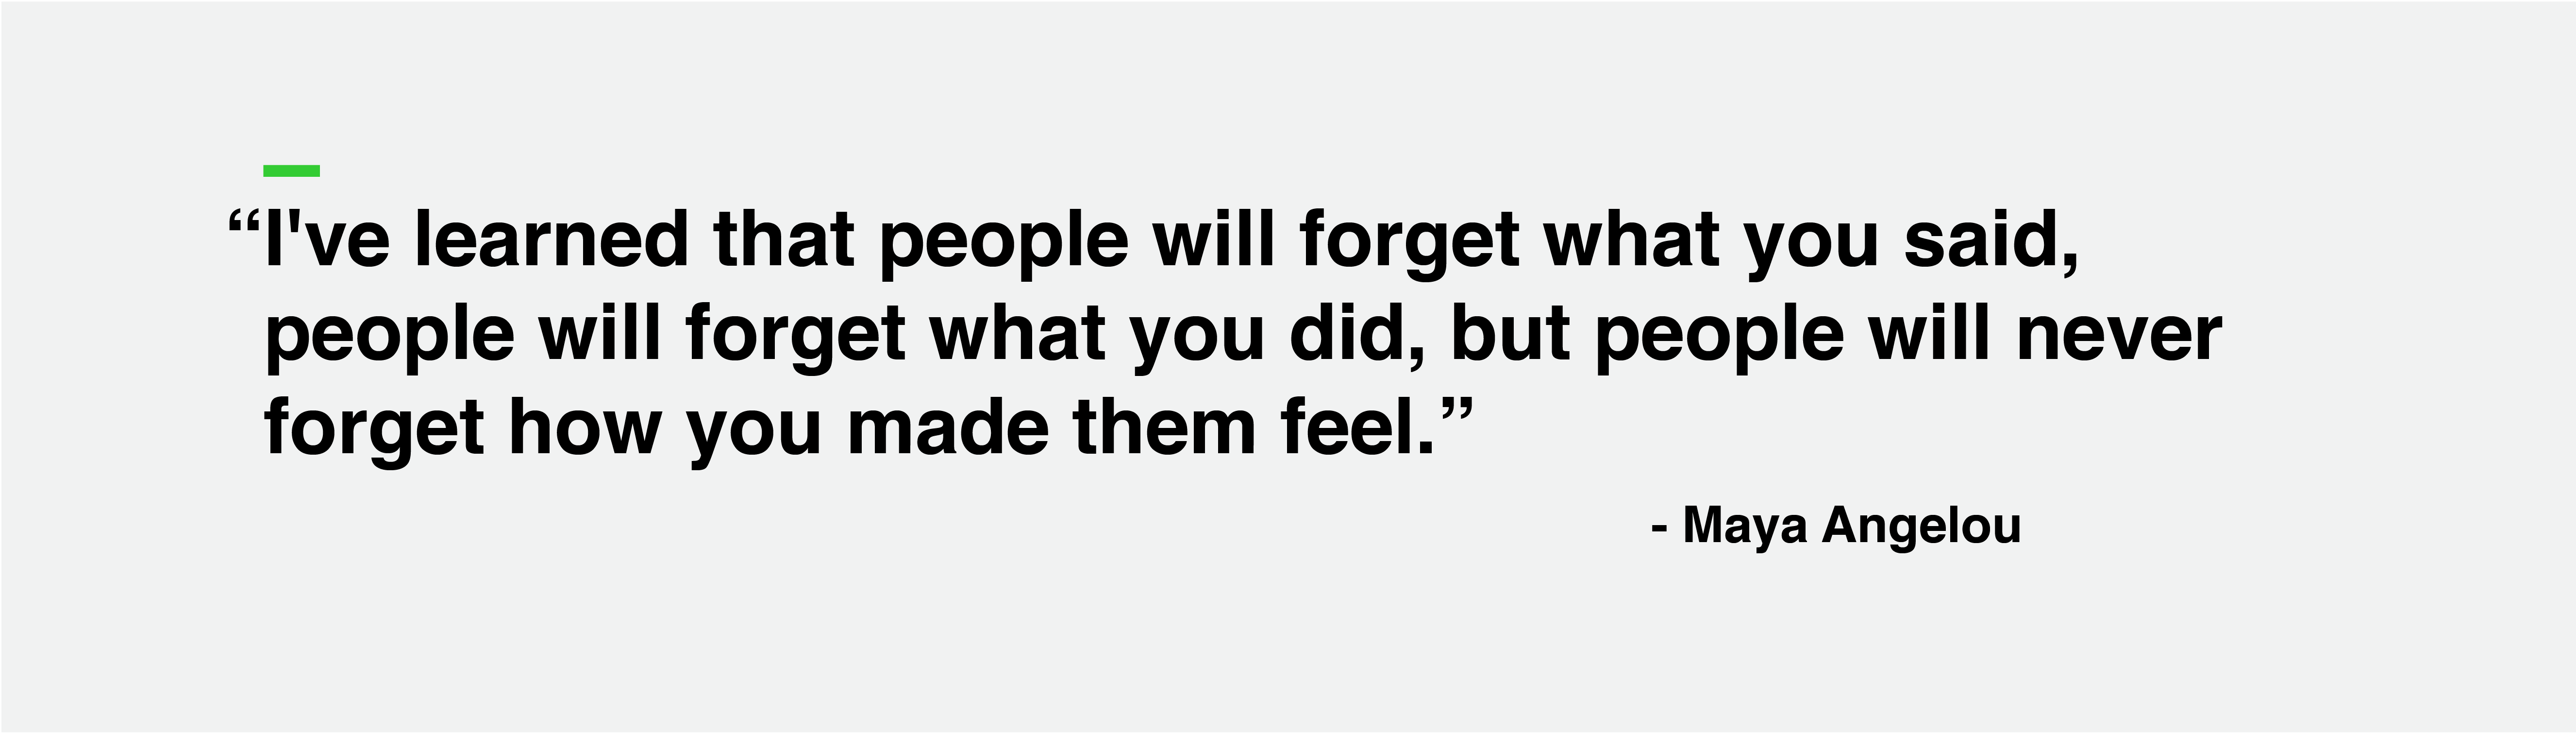 "I've learned that people will forget what you said, people will forget what you did, but people will never forget how you made them feel." - Maya Angelou